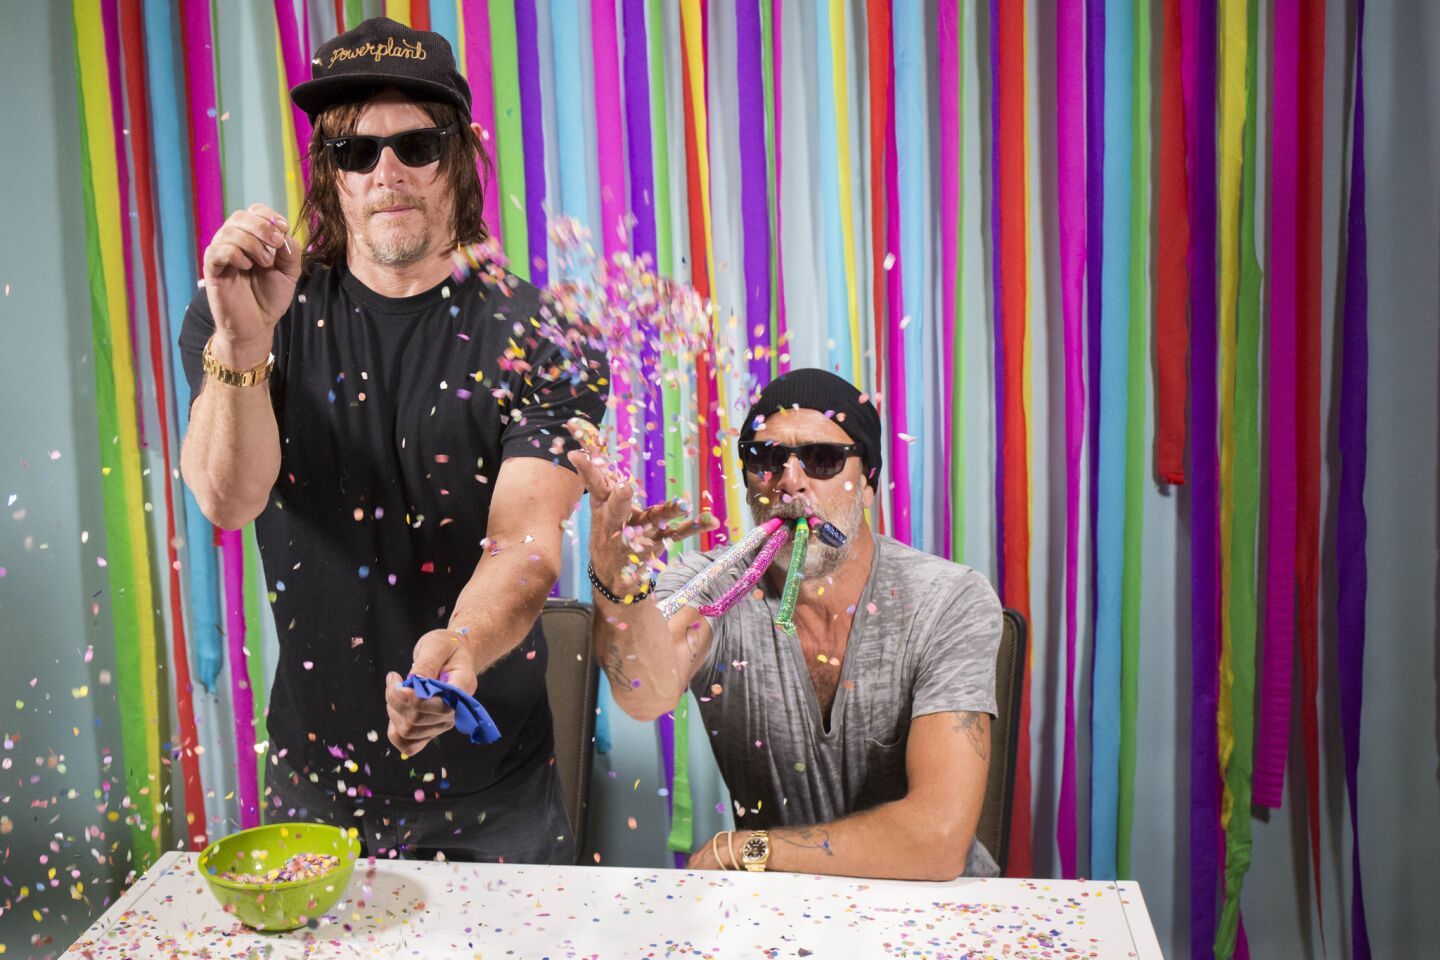 It's all confetti and party horns for "The Walking Dead's" Norman Reedus, left, and Jeffrey Dean Morgan.